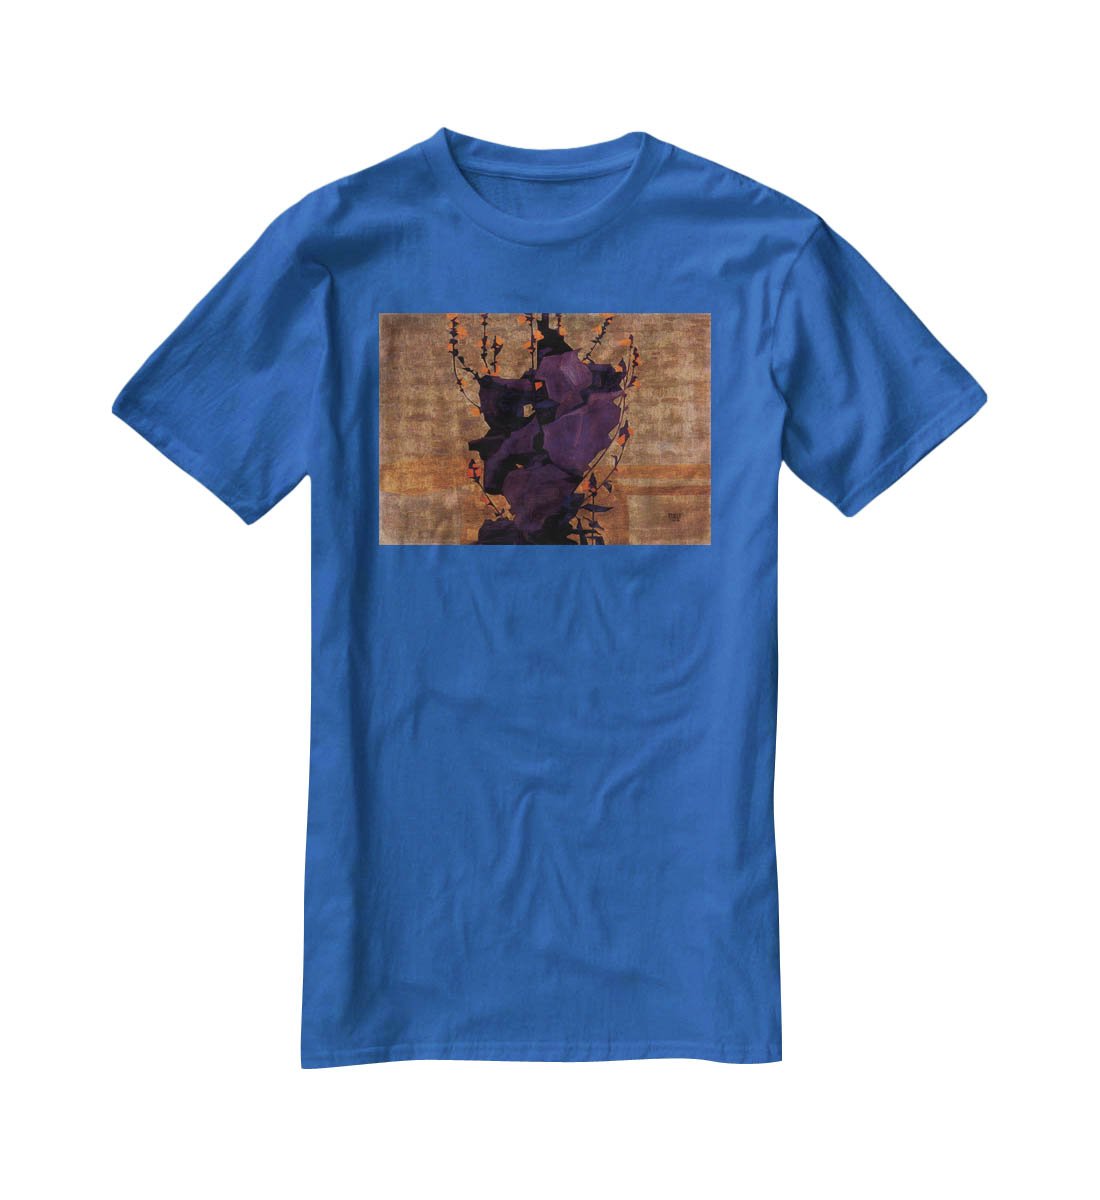 Stylized floral before decorative background style of life by Egon Schiele T-Shirt - Canvas Art Rocks - 2